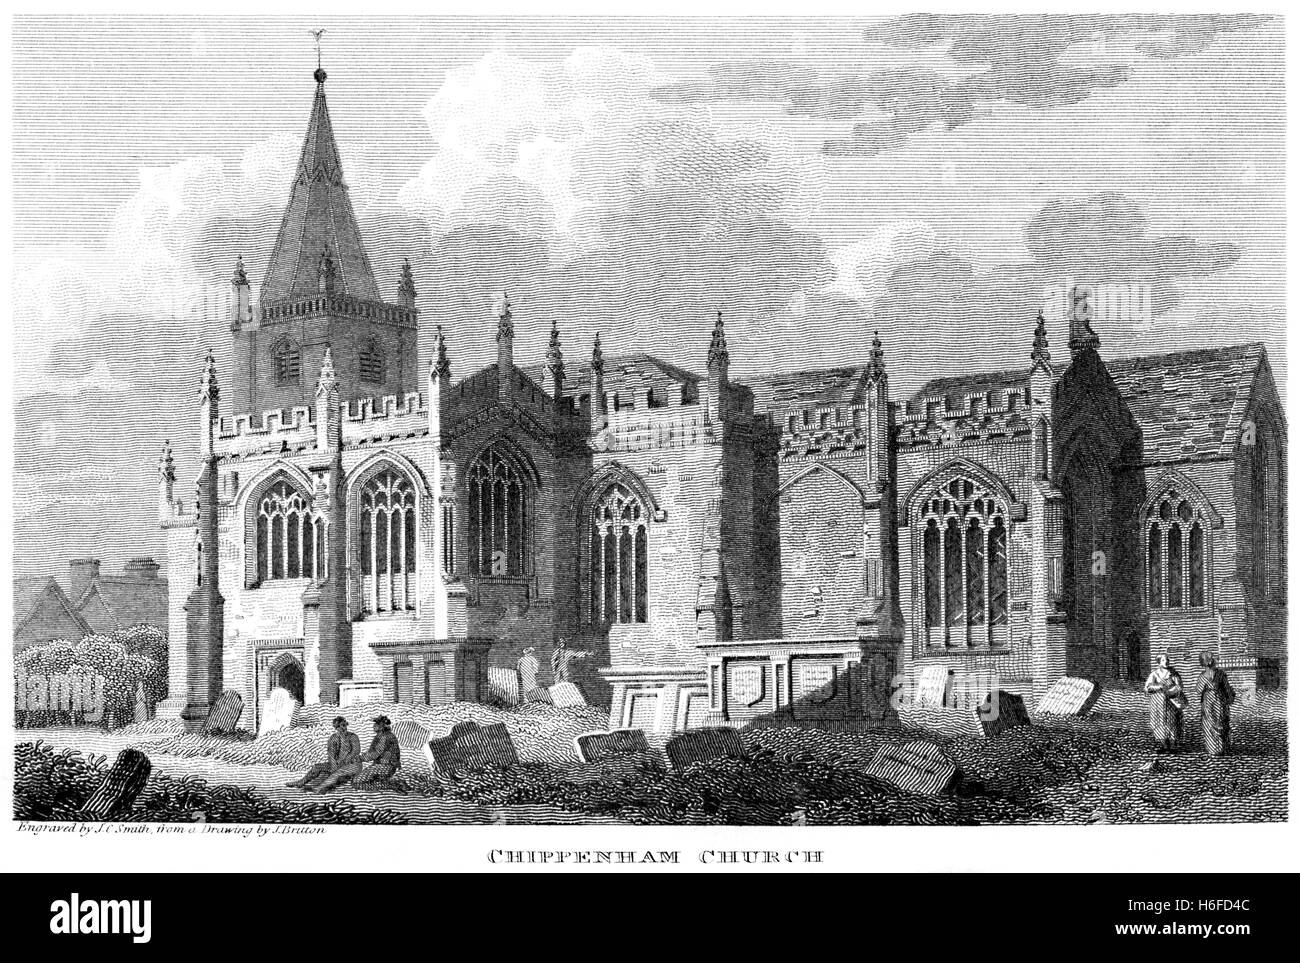 An engraving of Chippenham Church, Wiltshire scanned at high resolution from a book printed in 1812. Believed copyright free. Stock Photo